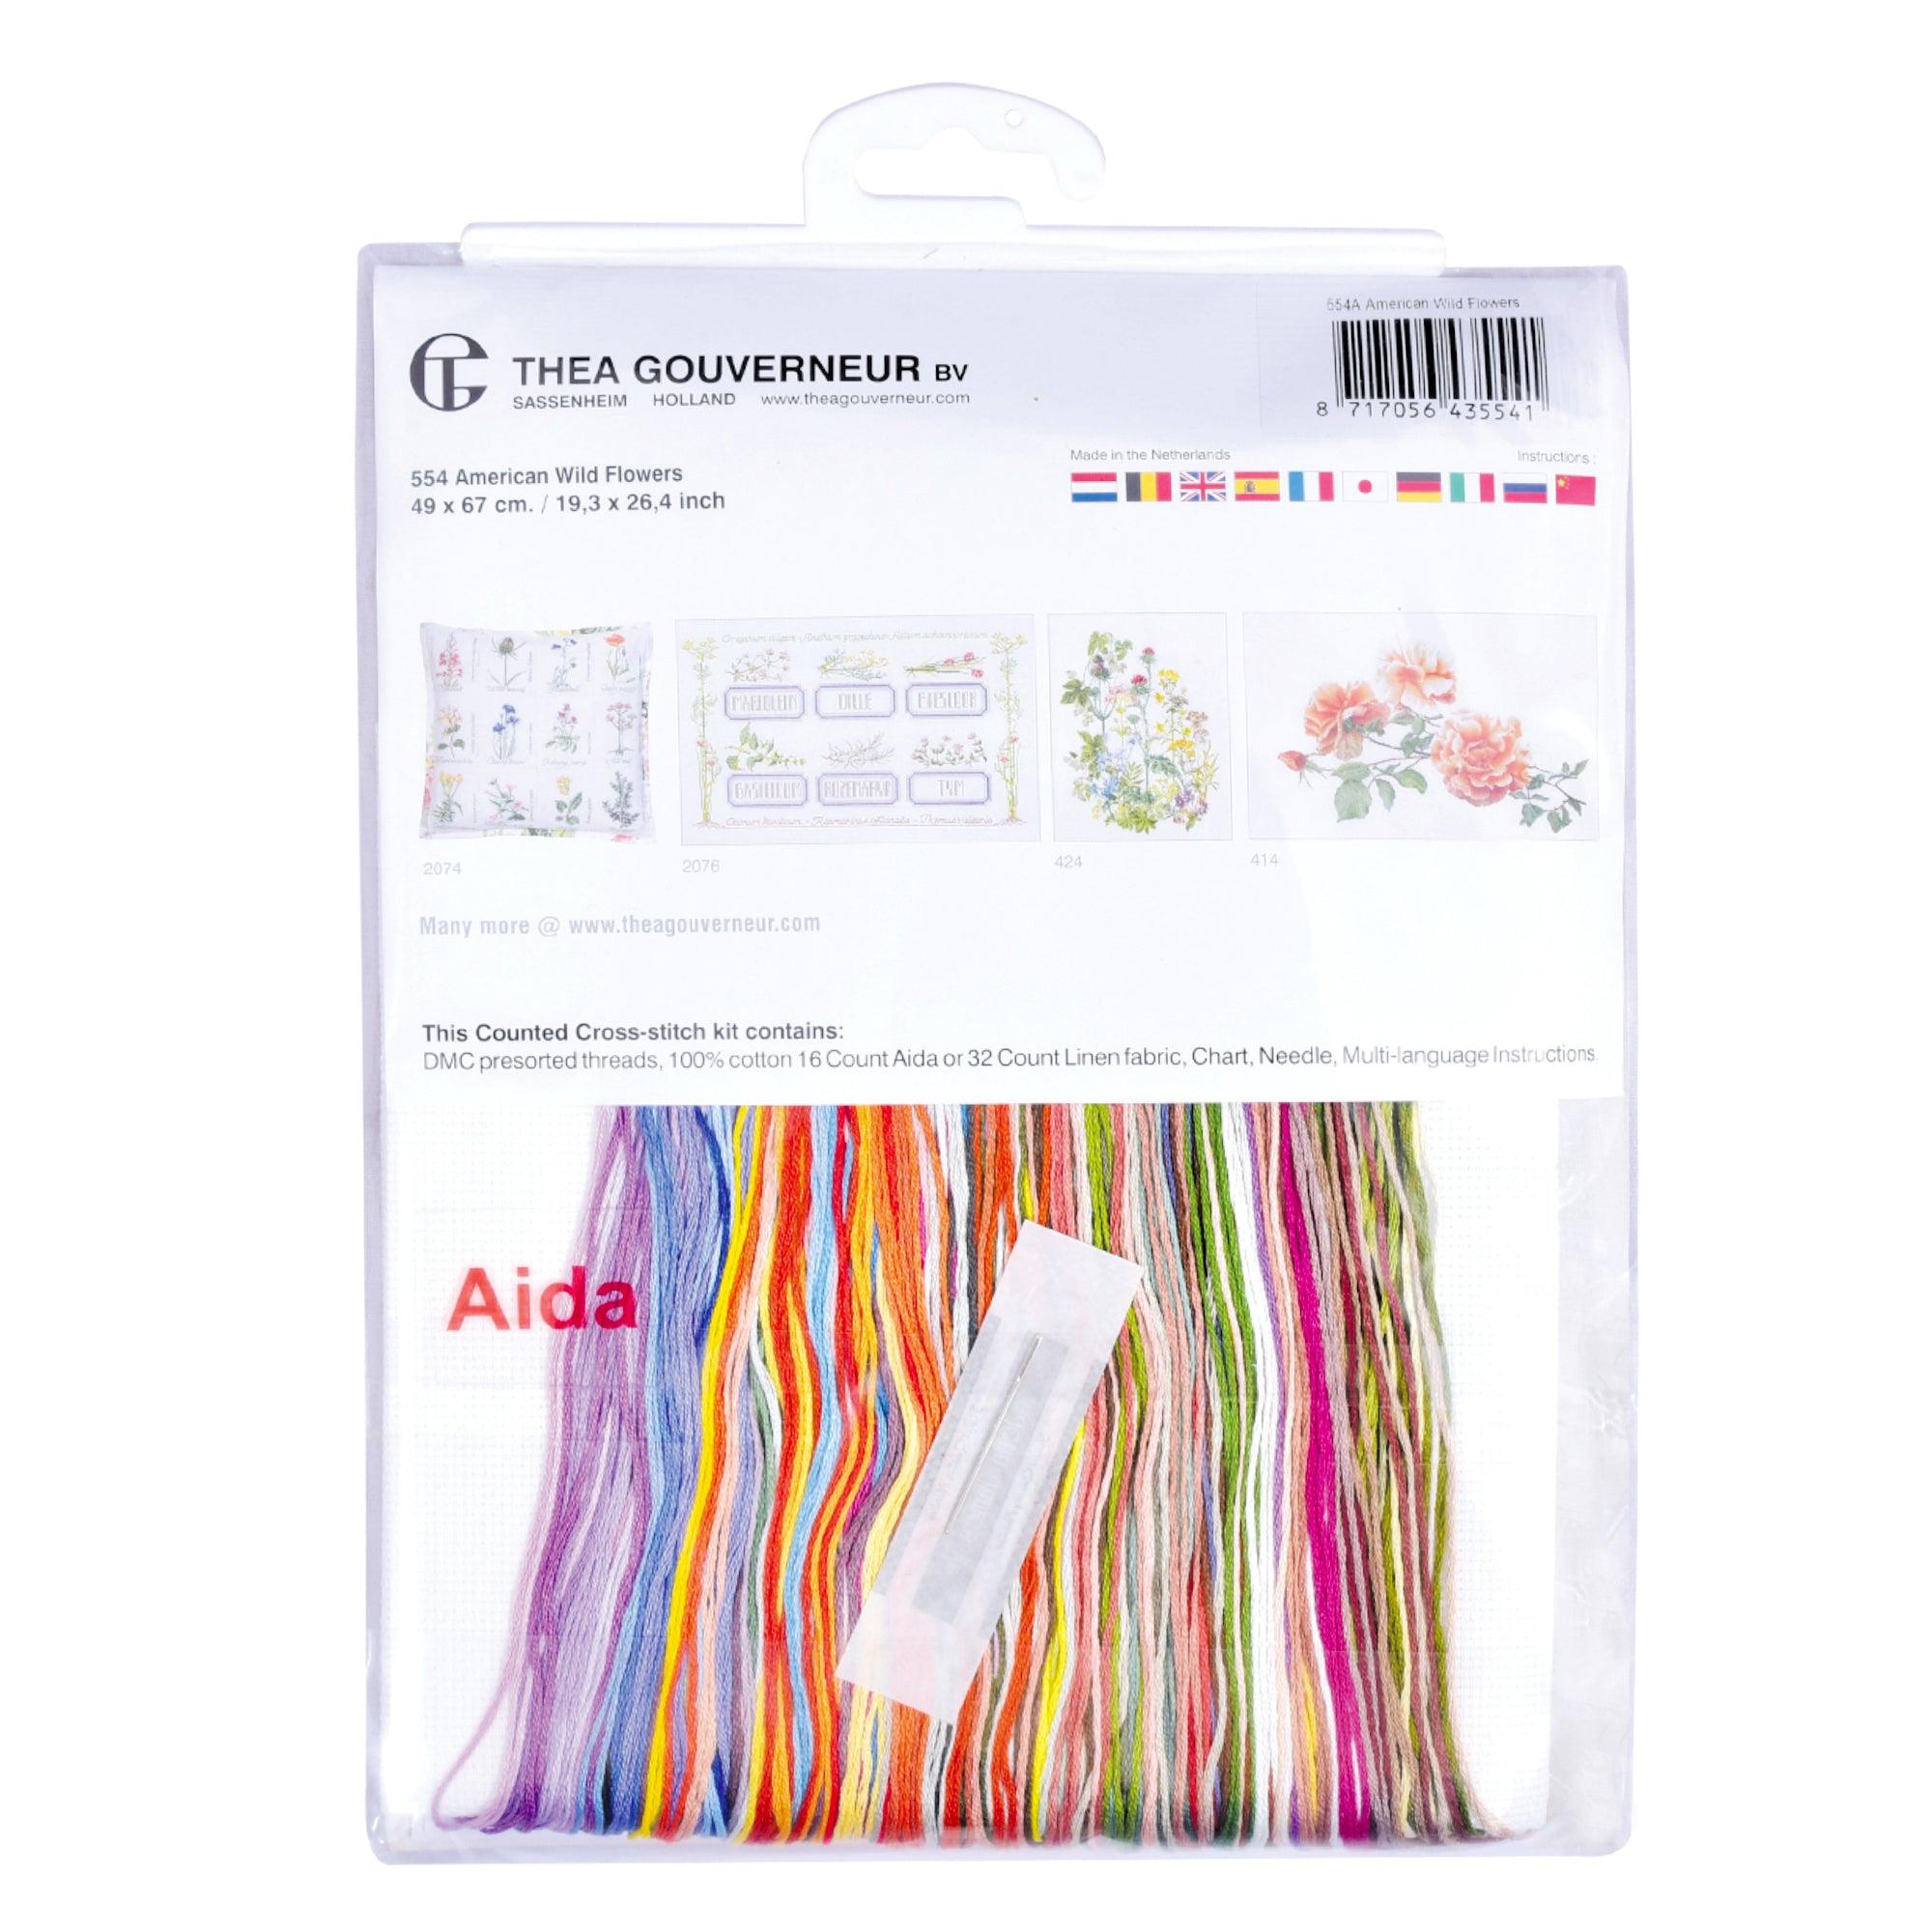 Thea Gouverneur - Counted Cross Stitch Kit - American Wild Flowers - Aida - 16 count - 554A - Thea Gouverneur Since 1959